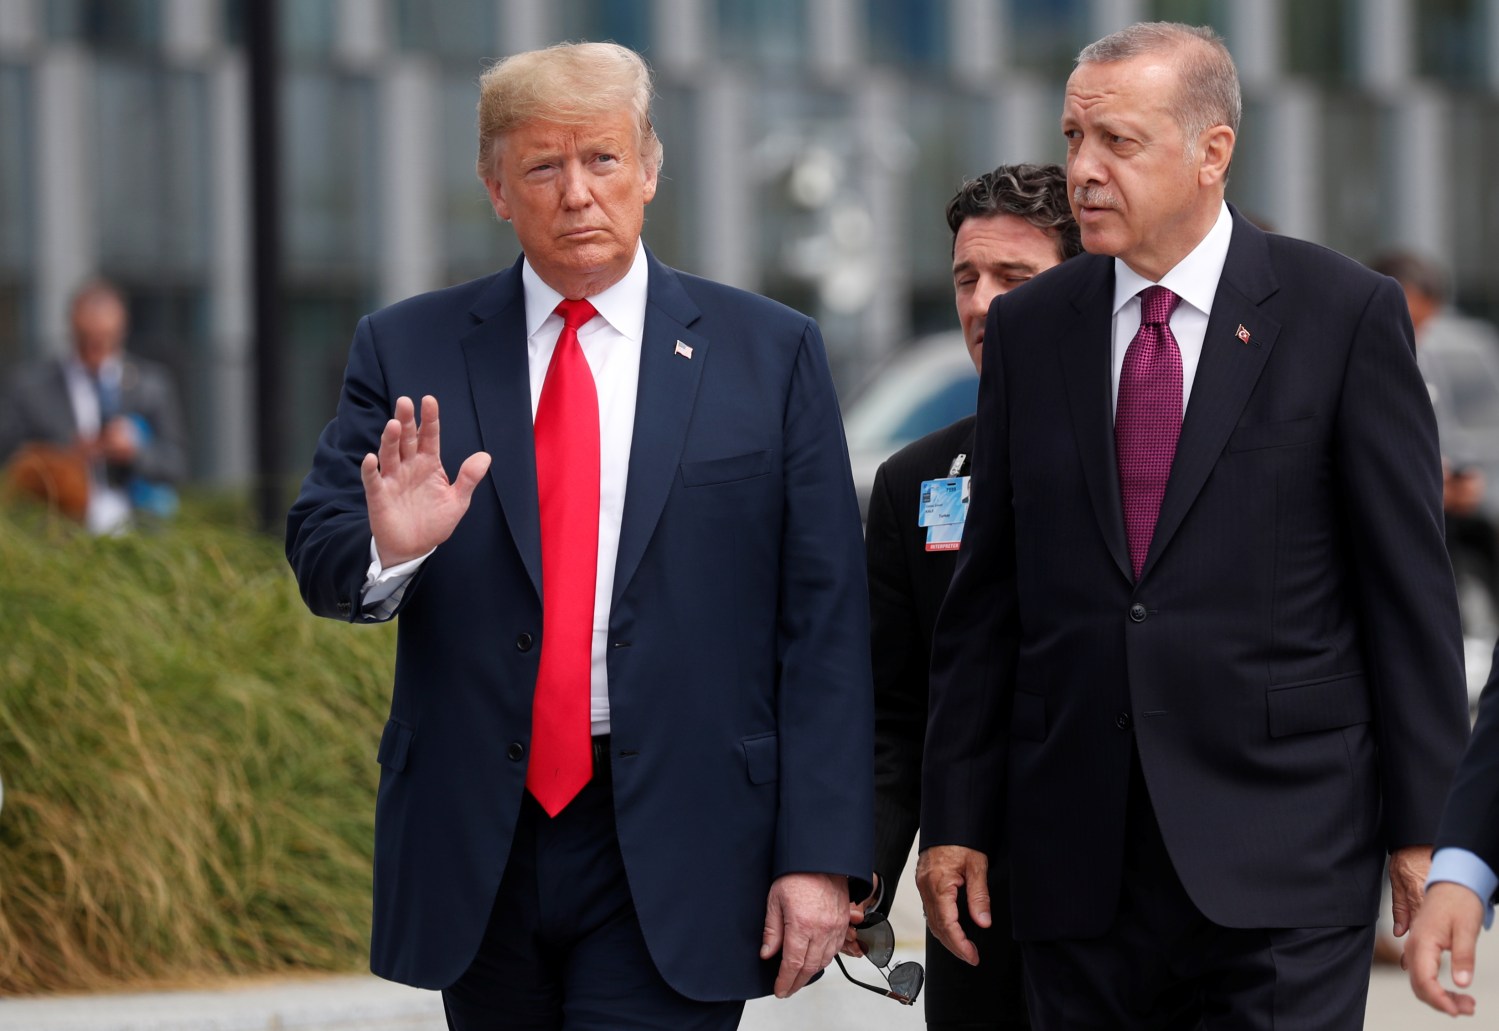 U.S. President Donald Trump and Turkish President Tayyip Erdogan attend the start of the NATO summit in Brussels, Belgium July 11, 2018. REUTERS/Kevin Lamarque